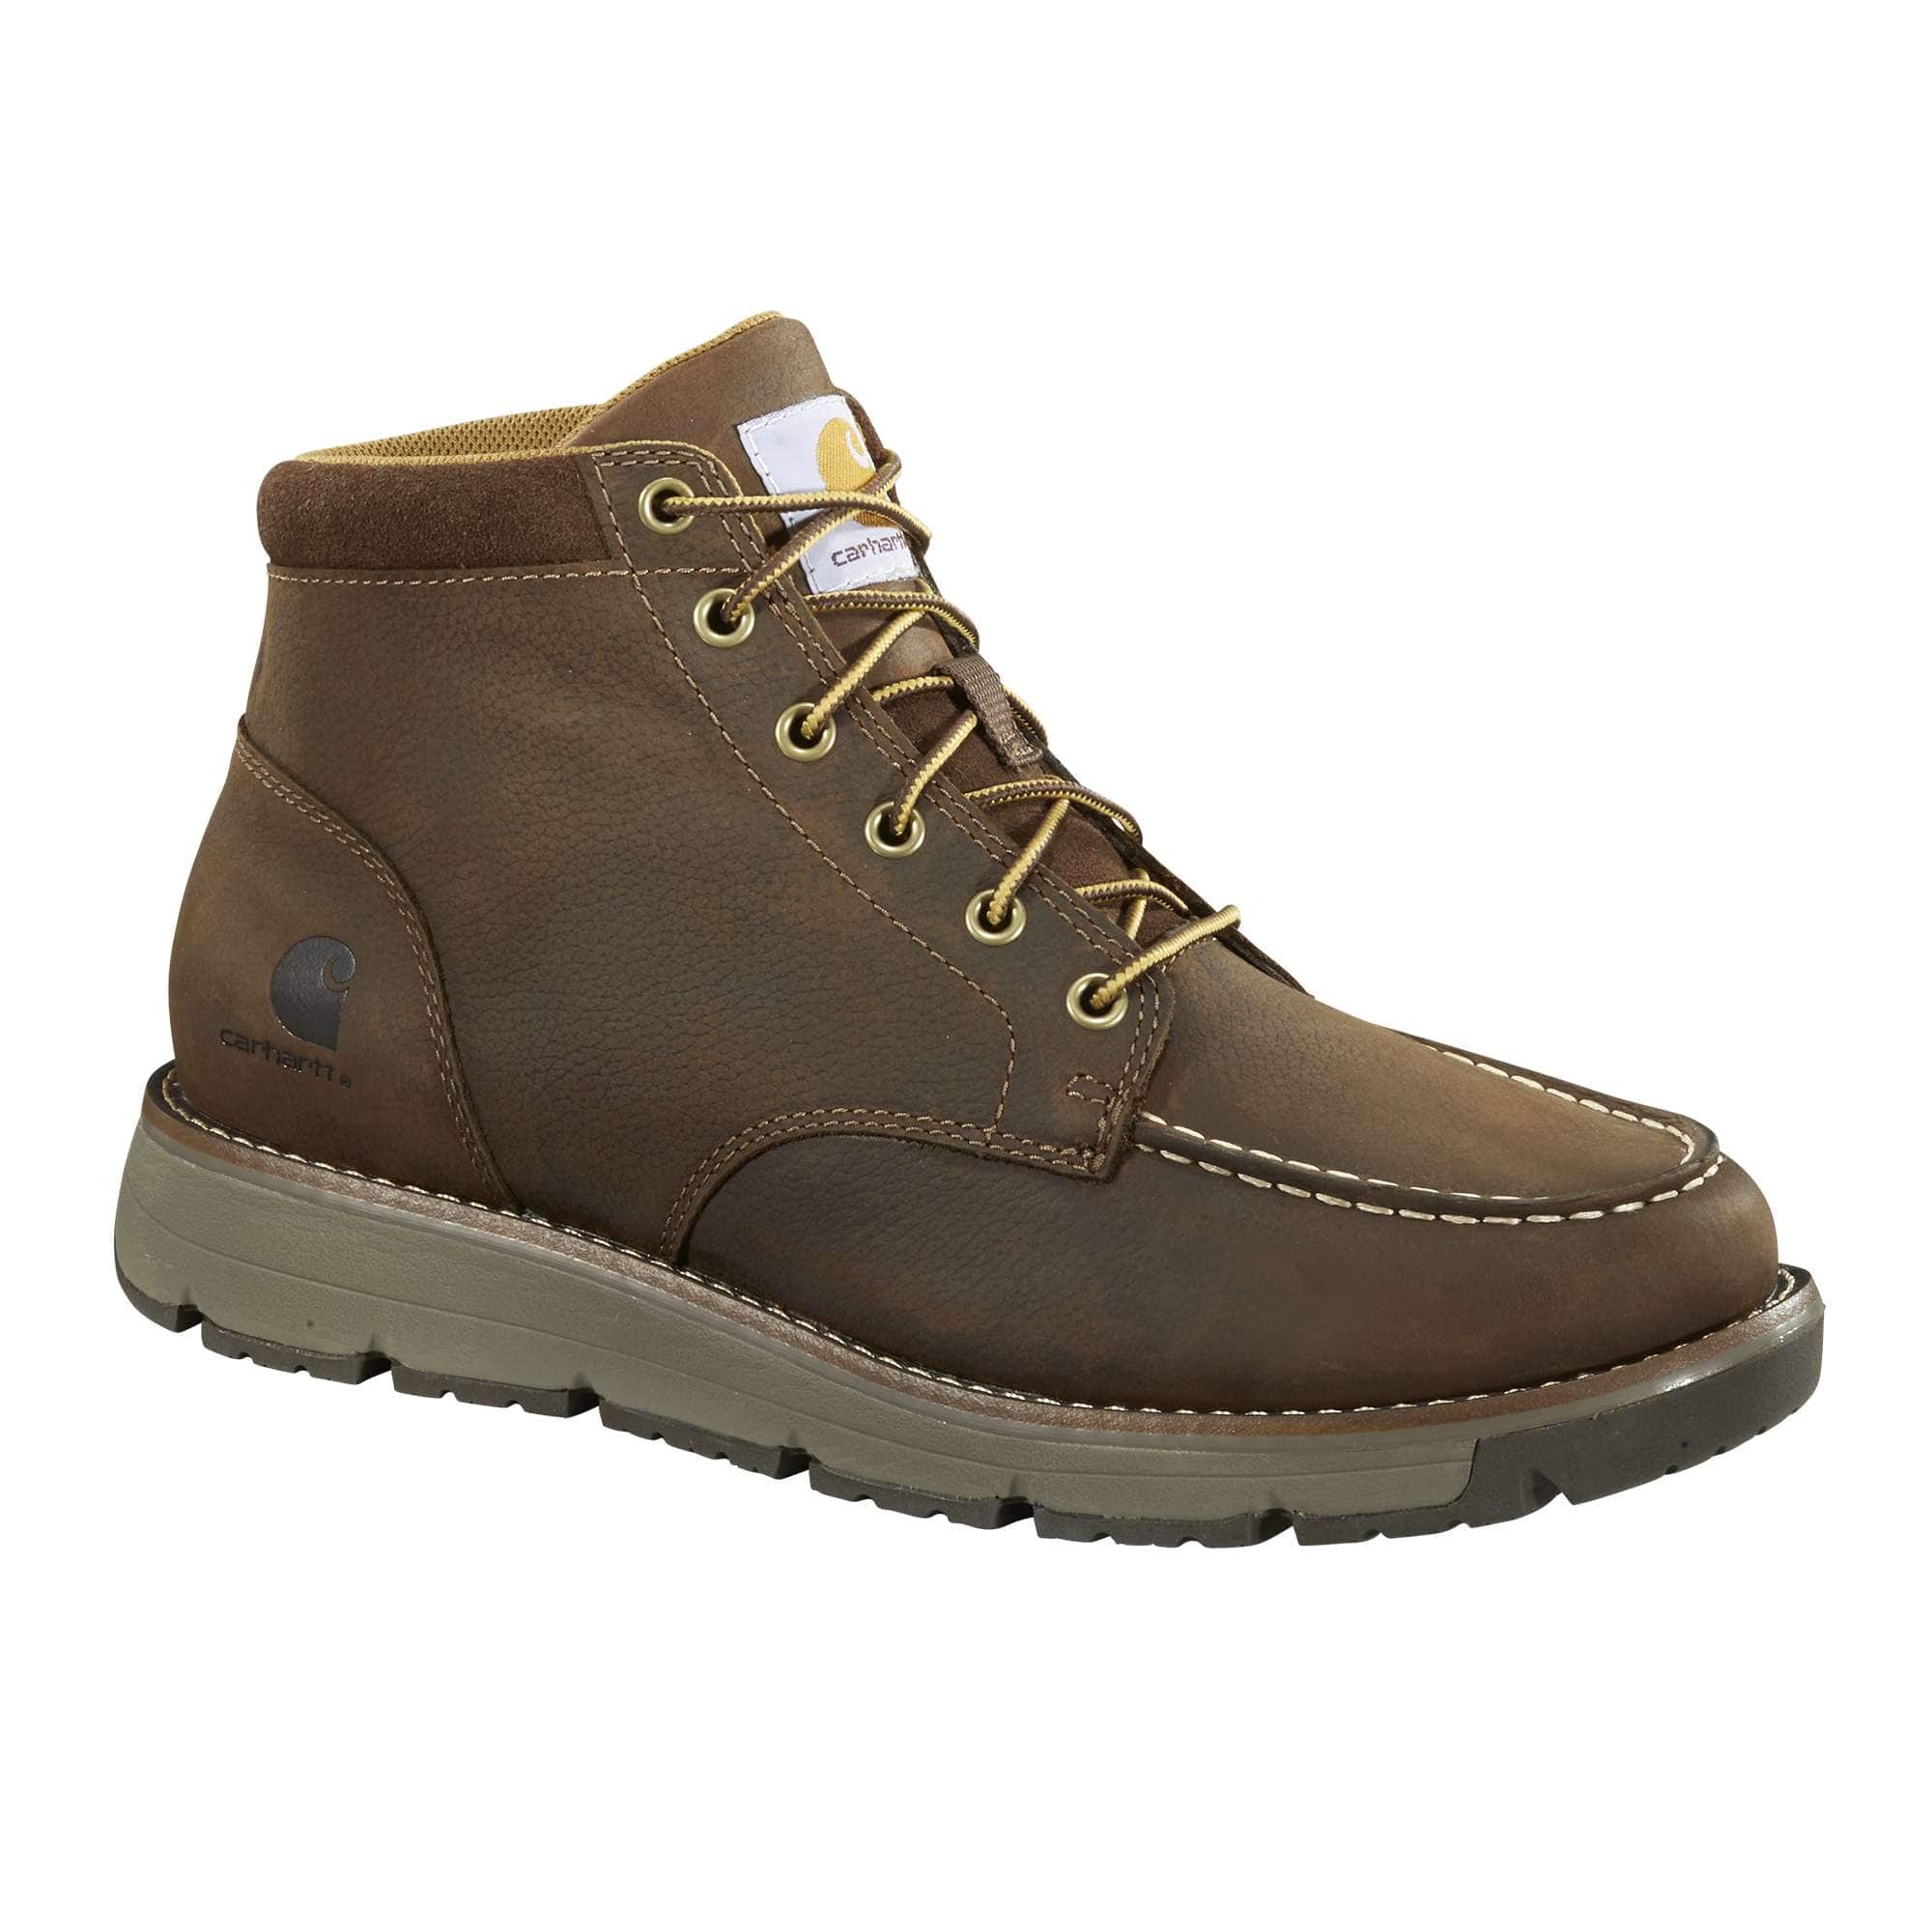 New Work Boots & Sneakers | Carhartt